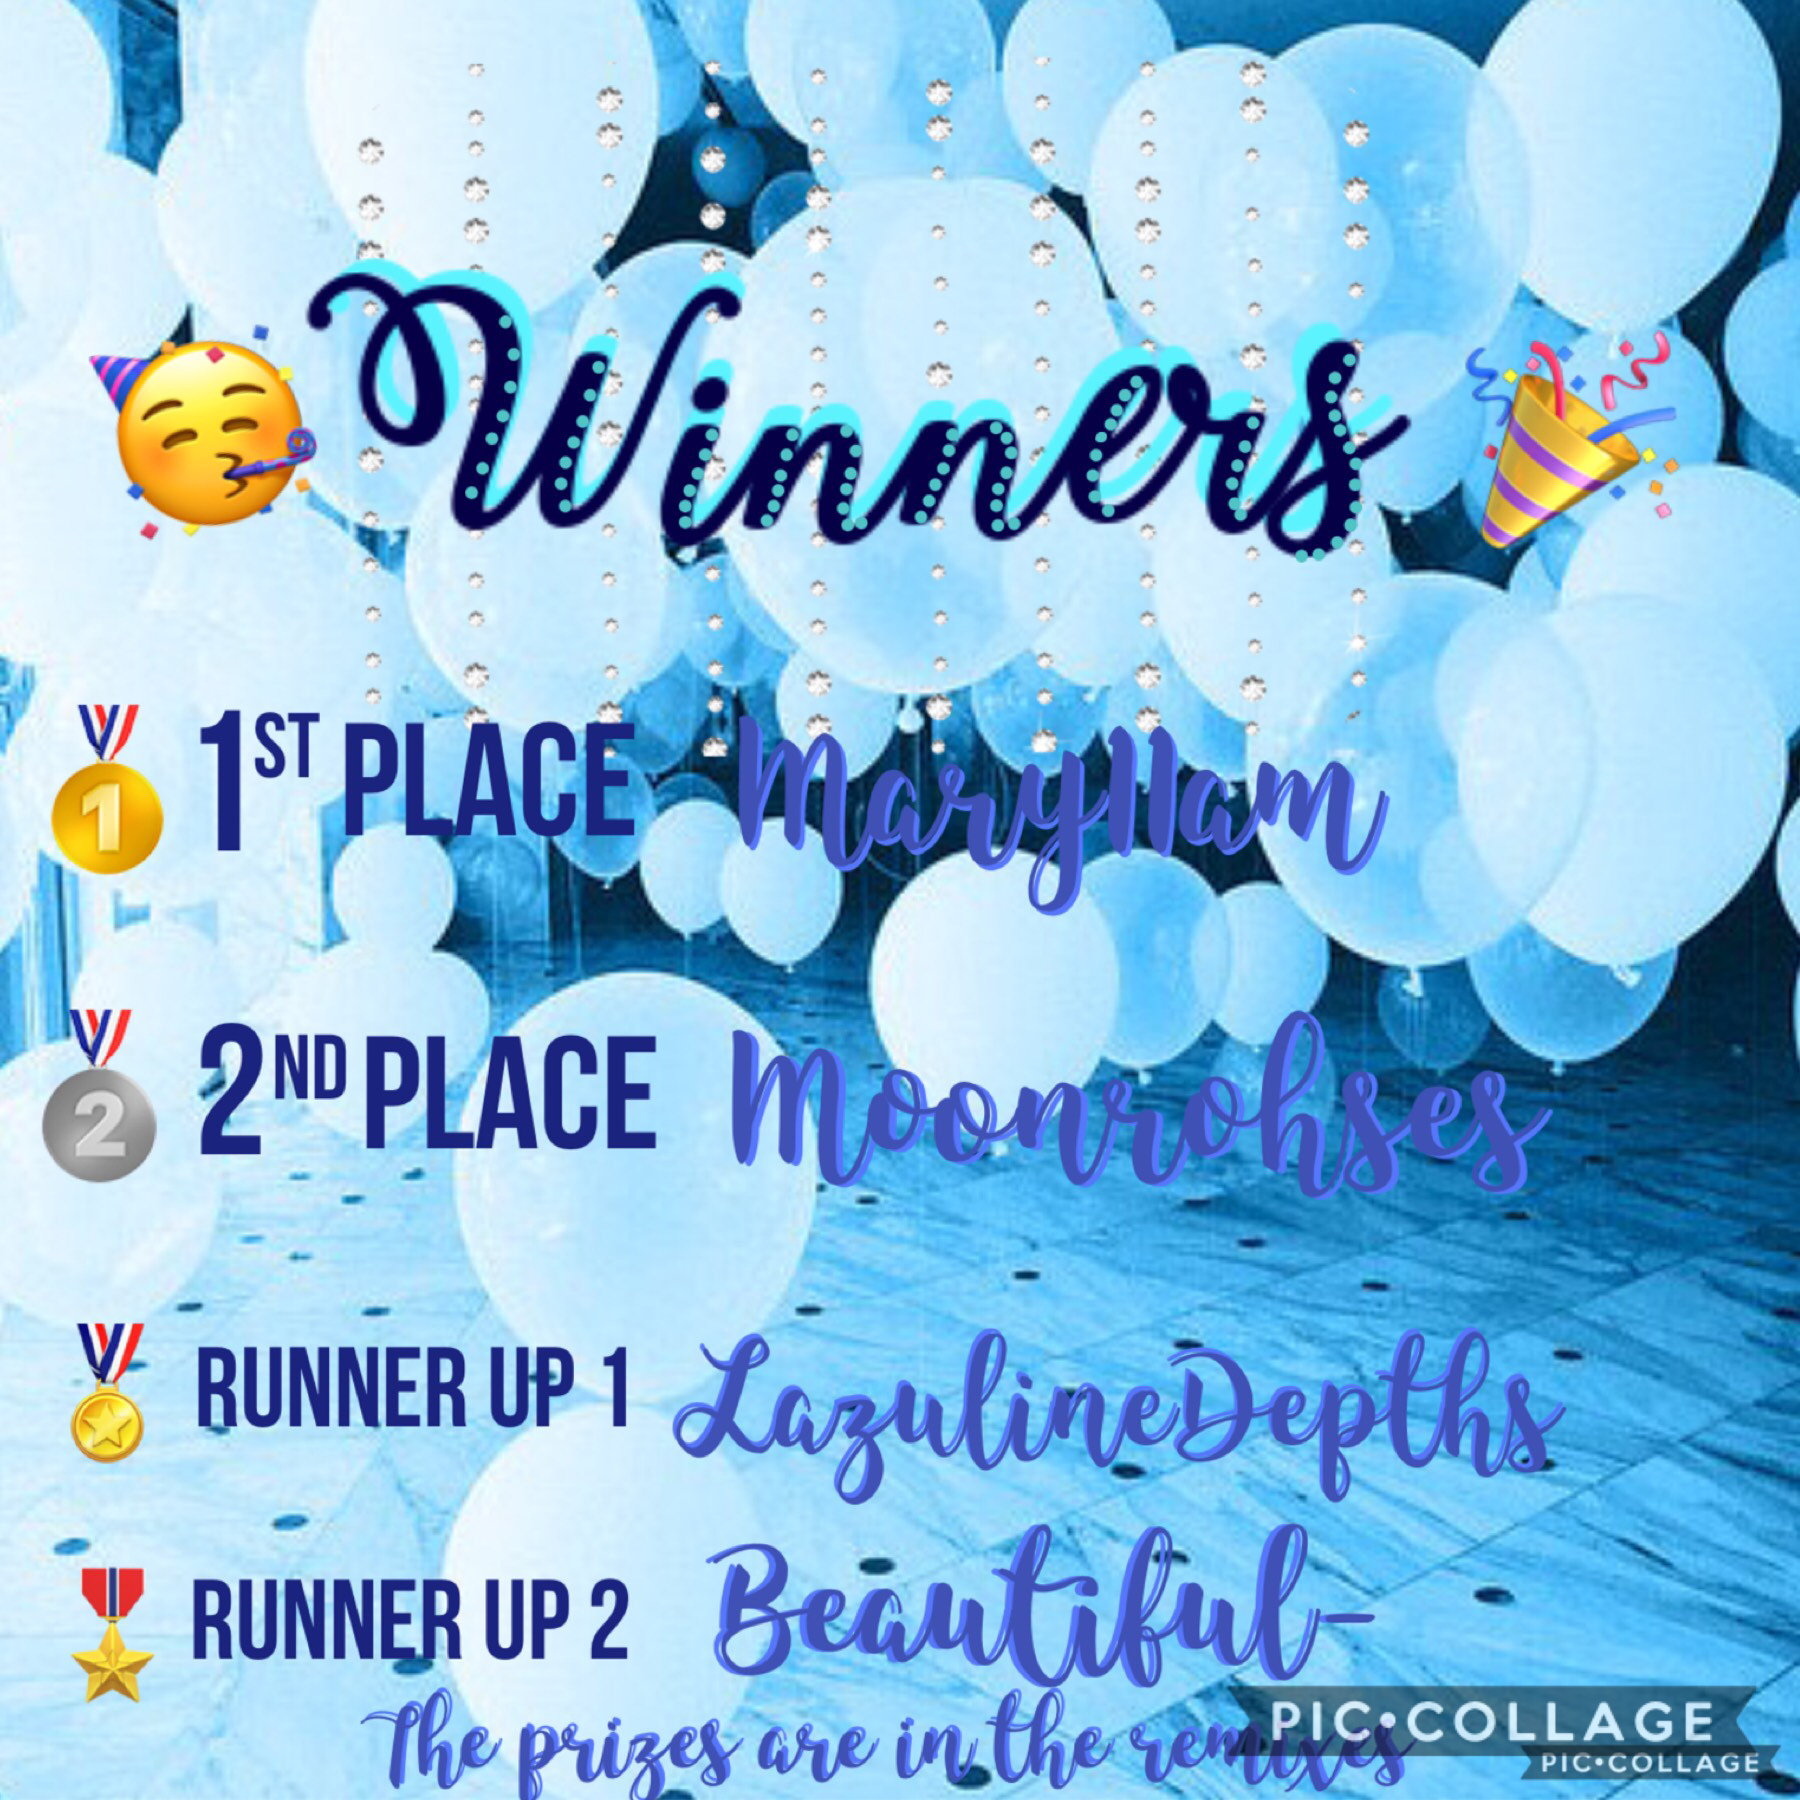 Tap this 🎉

CONGRATS TO EVERYONE AND MAKE SURE TO CHECK OUT THE REMIXES TO REVEAL THE PRIZES 
I LOVED EVERYONES COLLAGES THEY WERE AMAZING 
I CHANGED THE ADVERTISEMENT PRIZE TO A COLLAB 😘